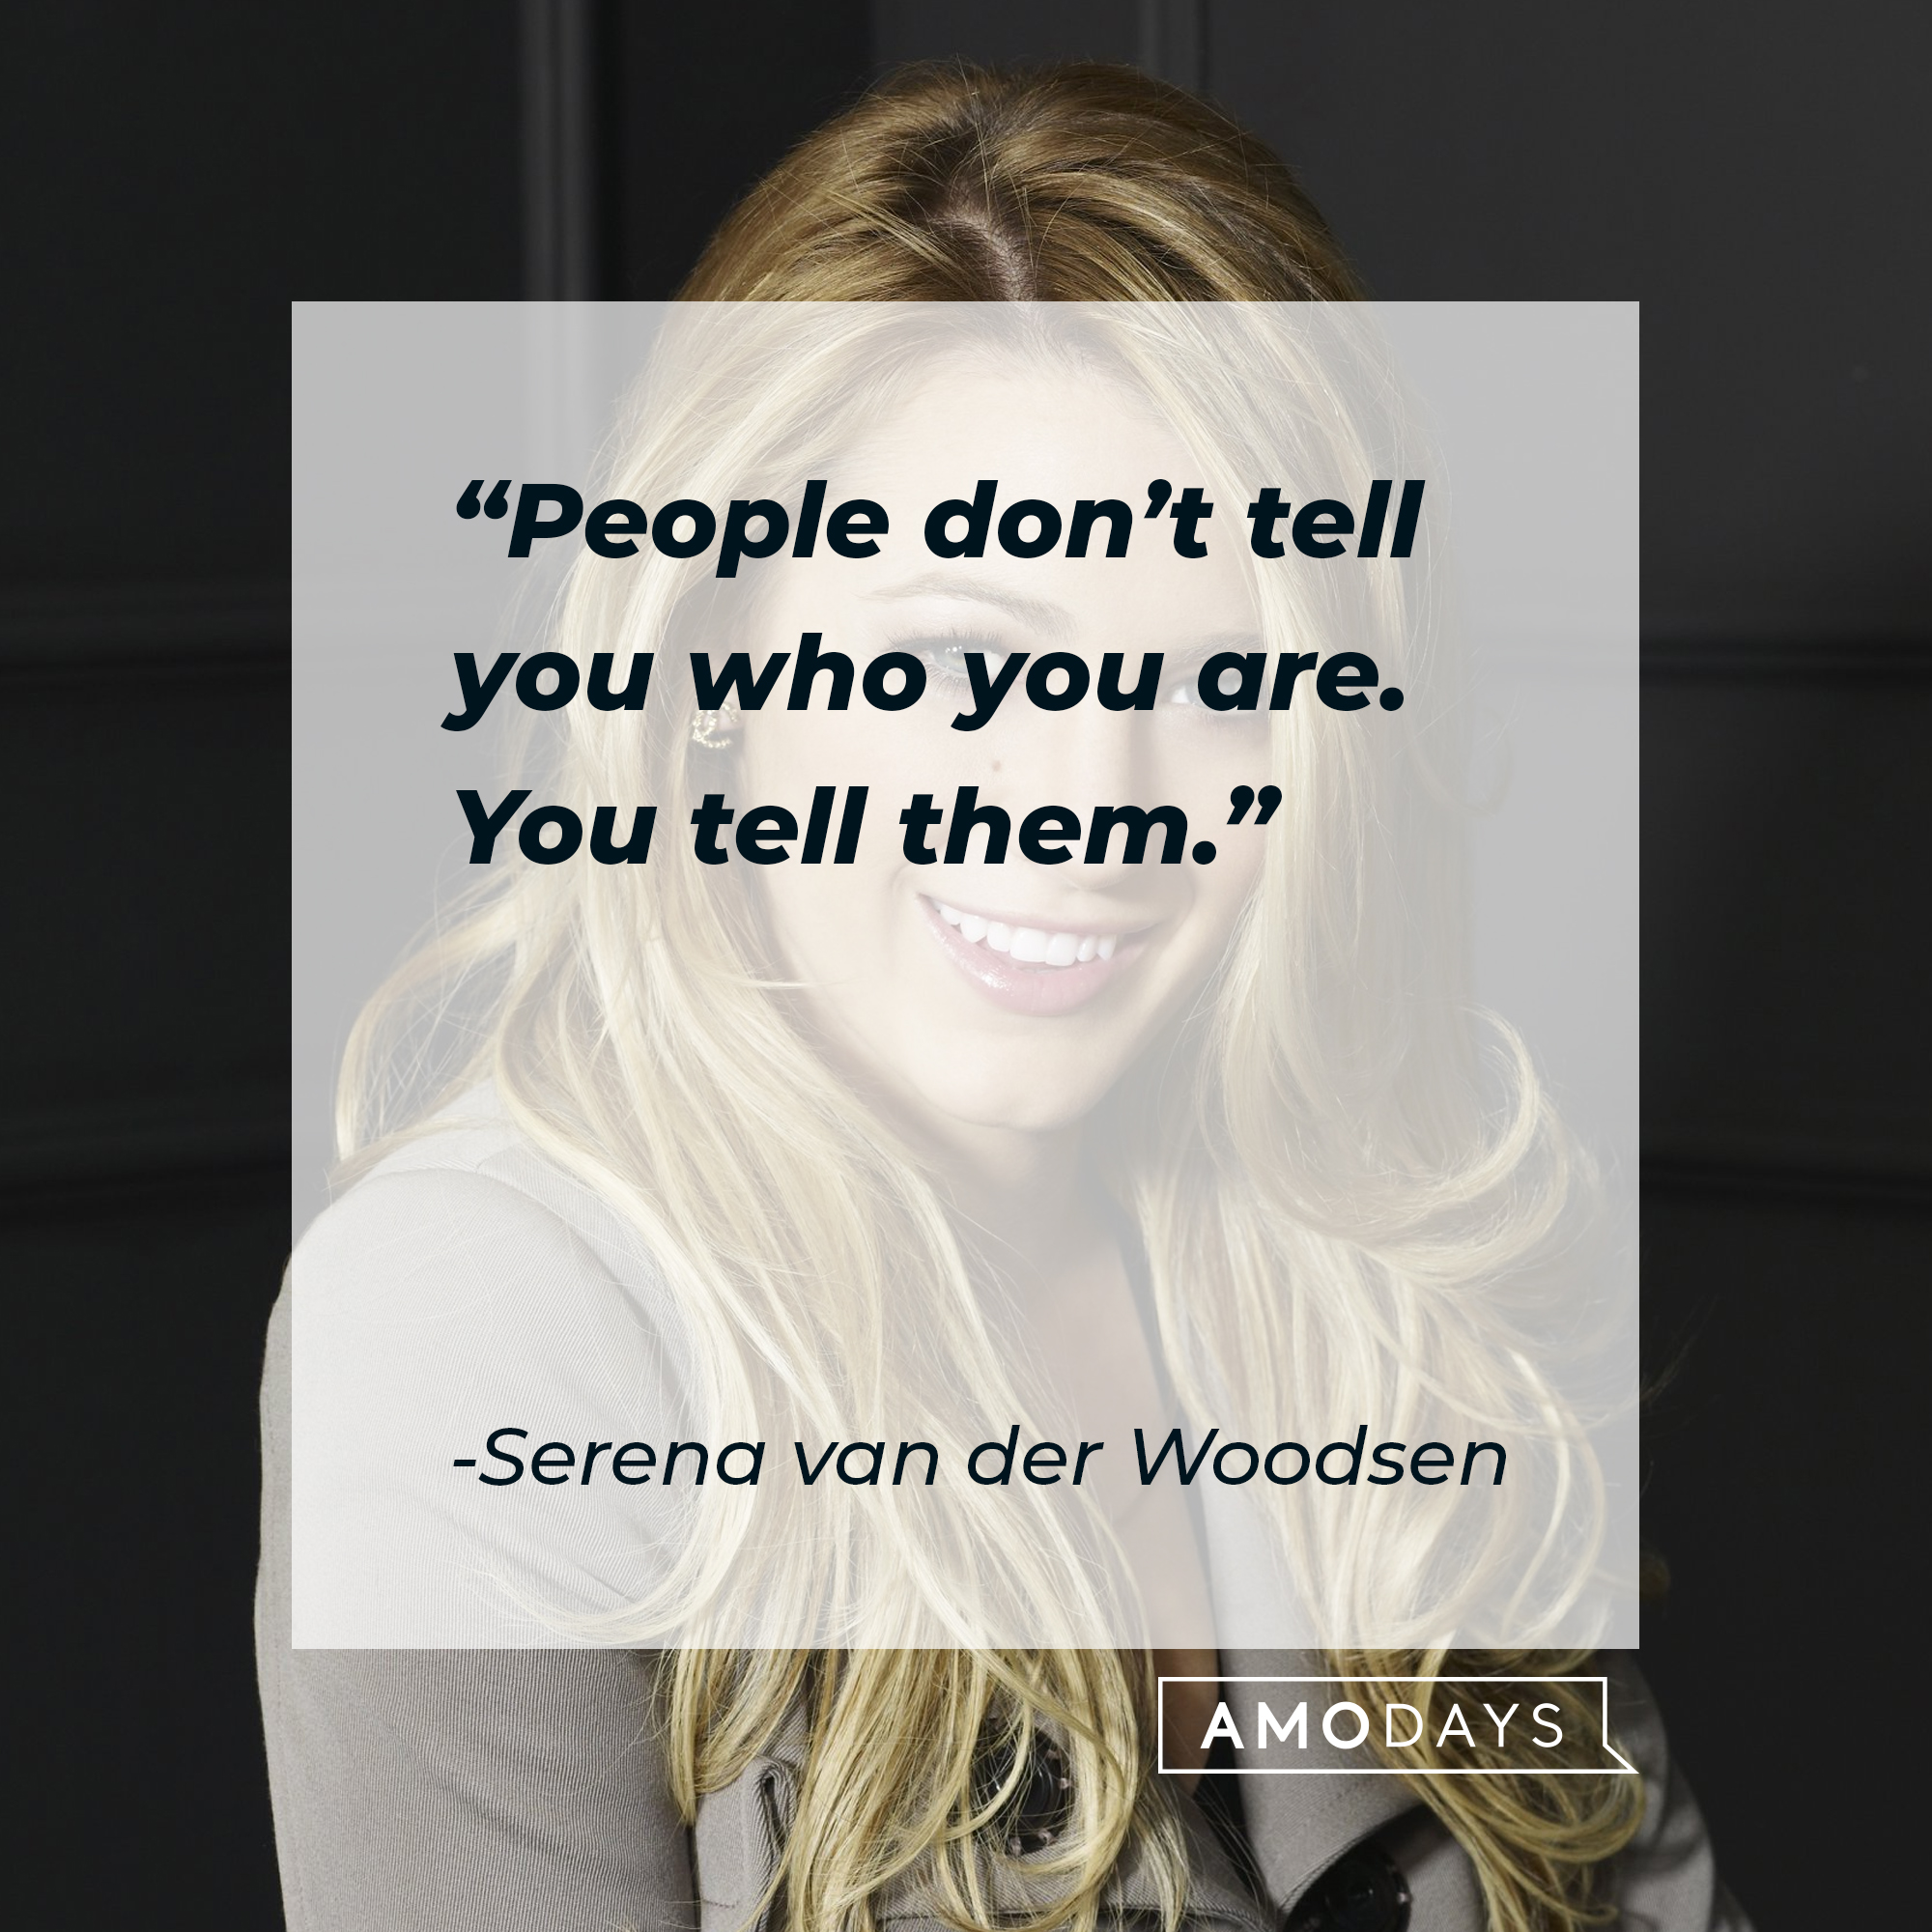 Serena van der Woodsen, with her quote: “People don’t tell you who you are. You tell them.” | Source: Facebook.com/GossipGirl